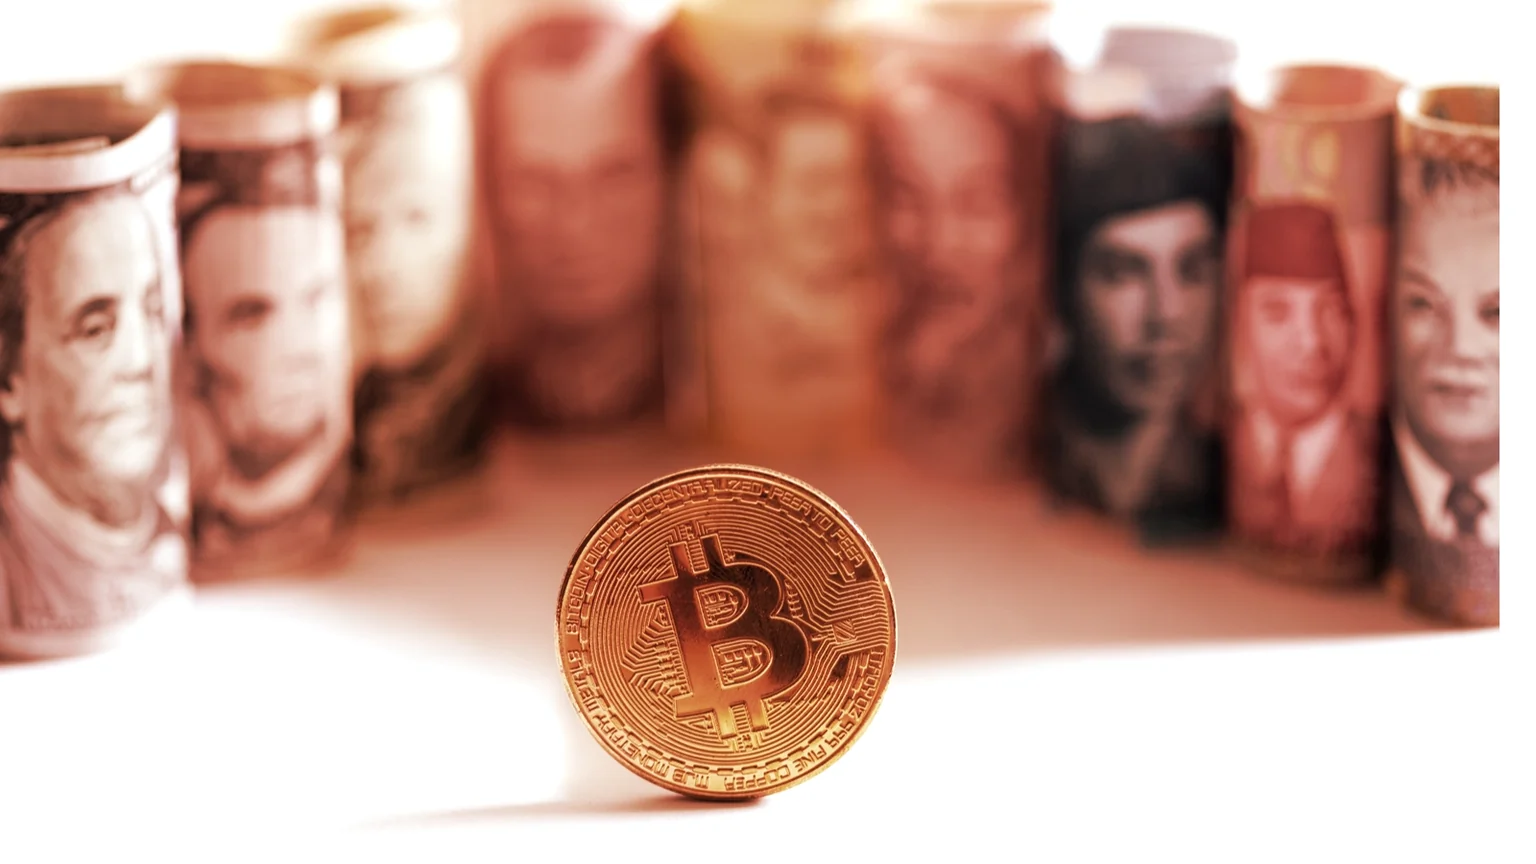 Policies on crypto adoption vary greatly from country to country. Image: Shutterstock